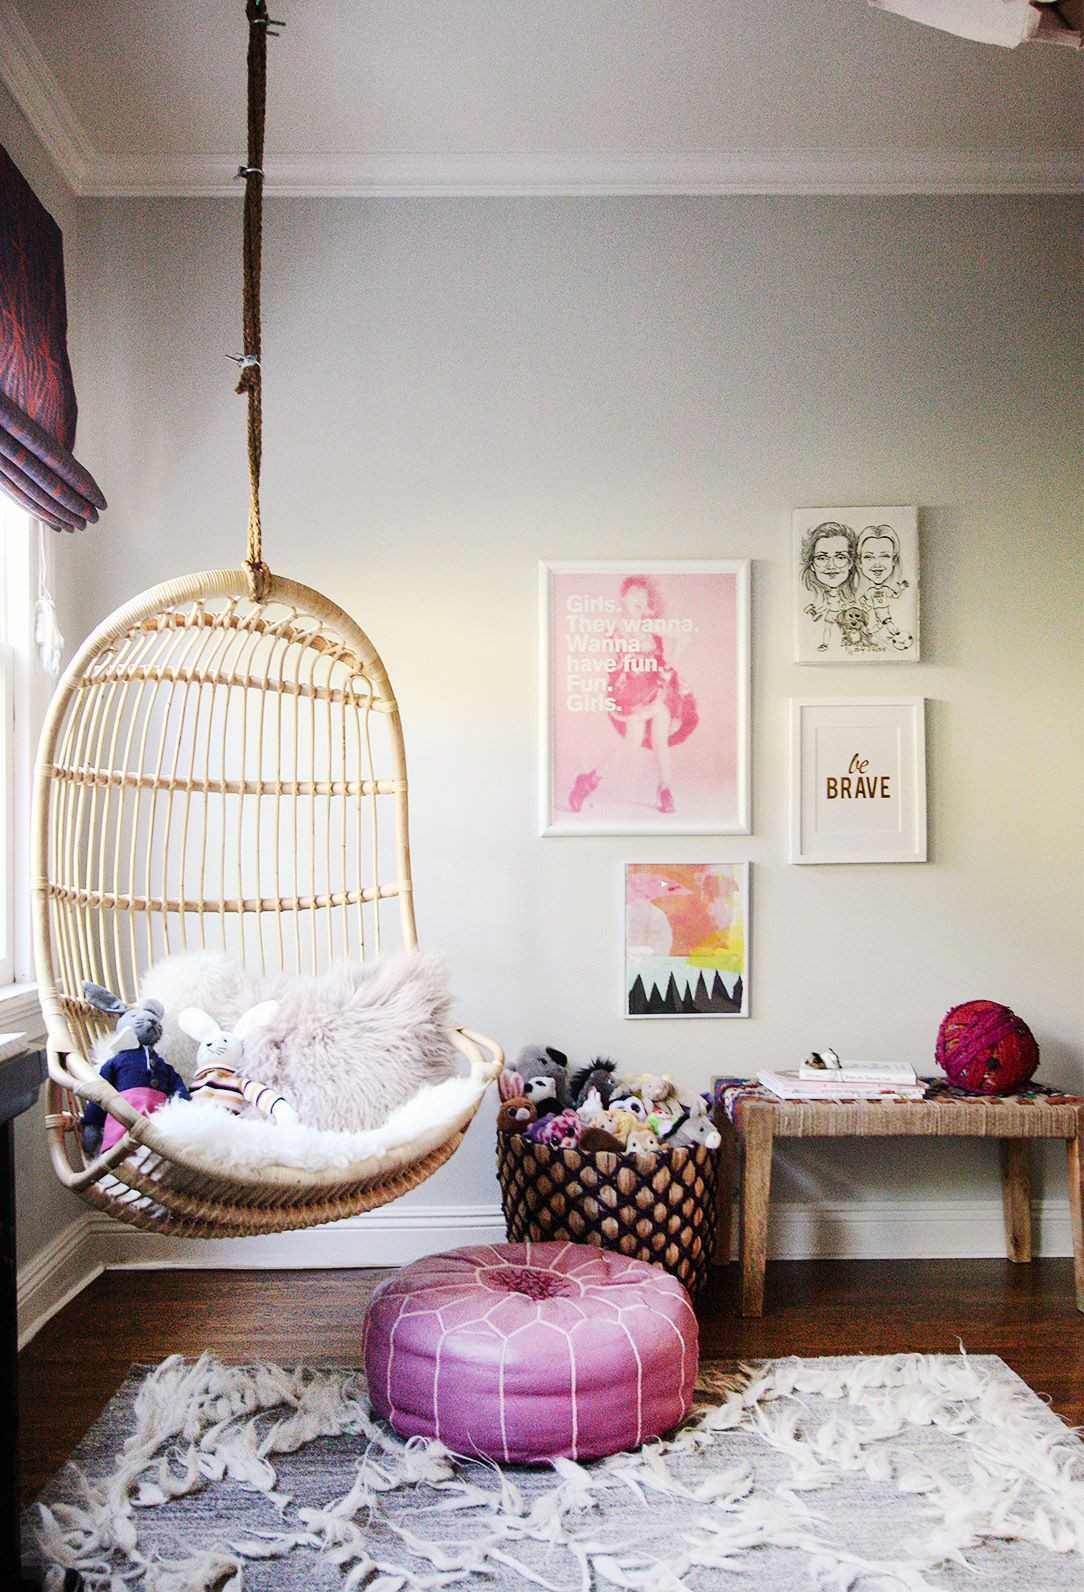 Hanging Chair Living Room
 12 Design mandments We Learned From Cool Scandinavian